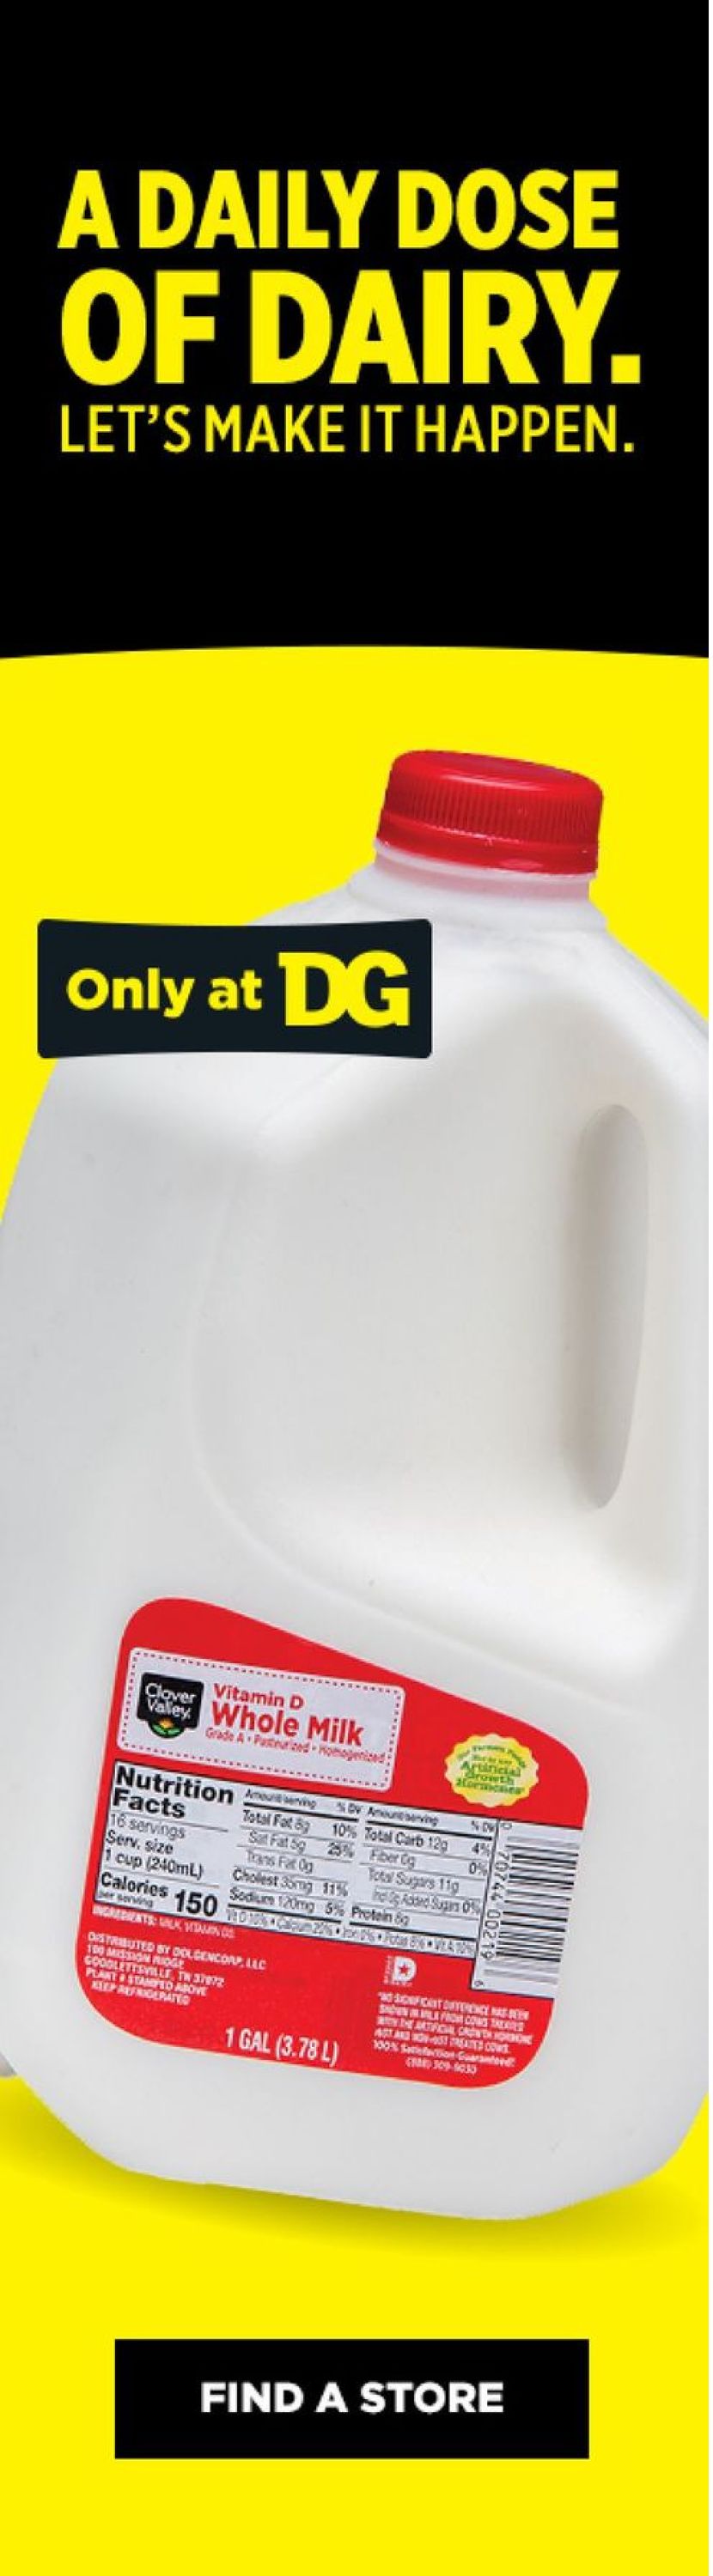 Dollar General Ad from 09/19/2021